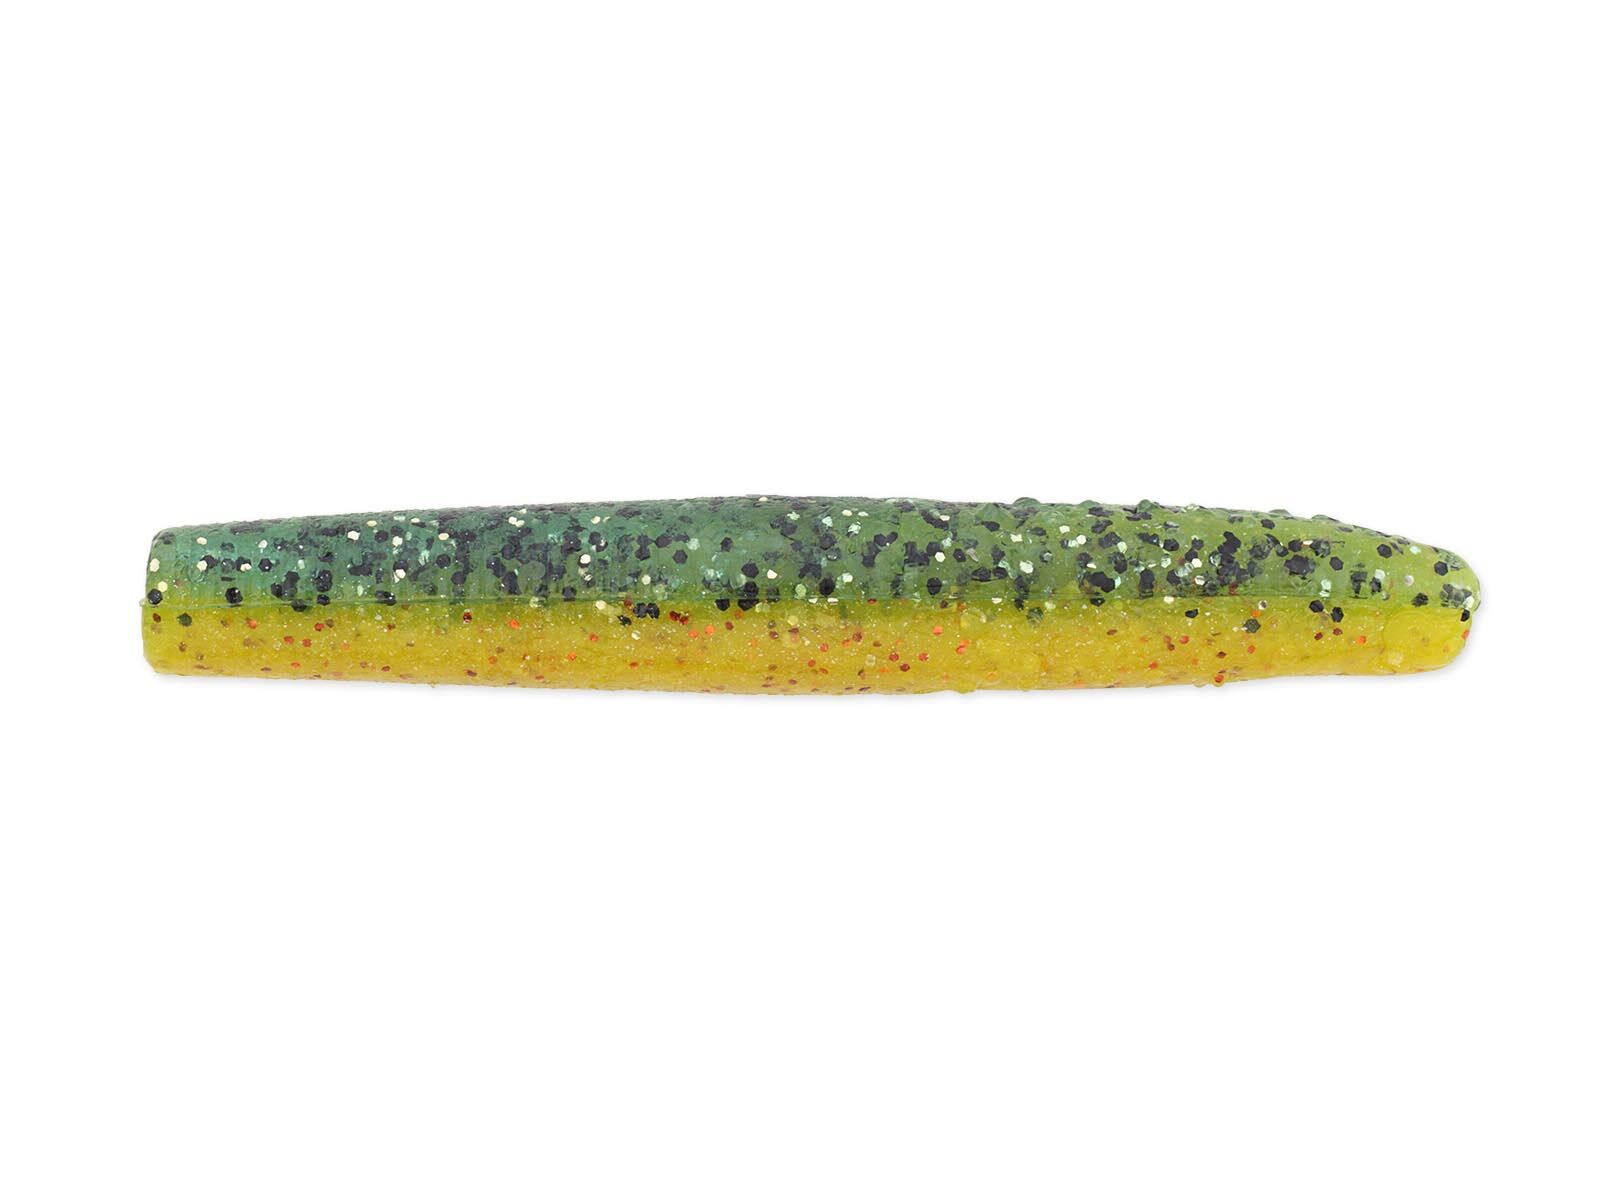 2.75" Finesse TRD - Pro Yellow Perch